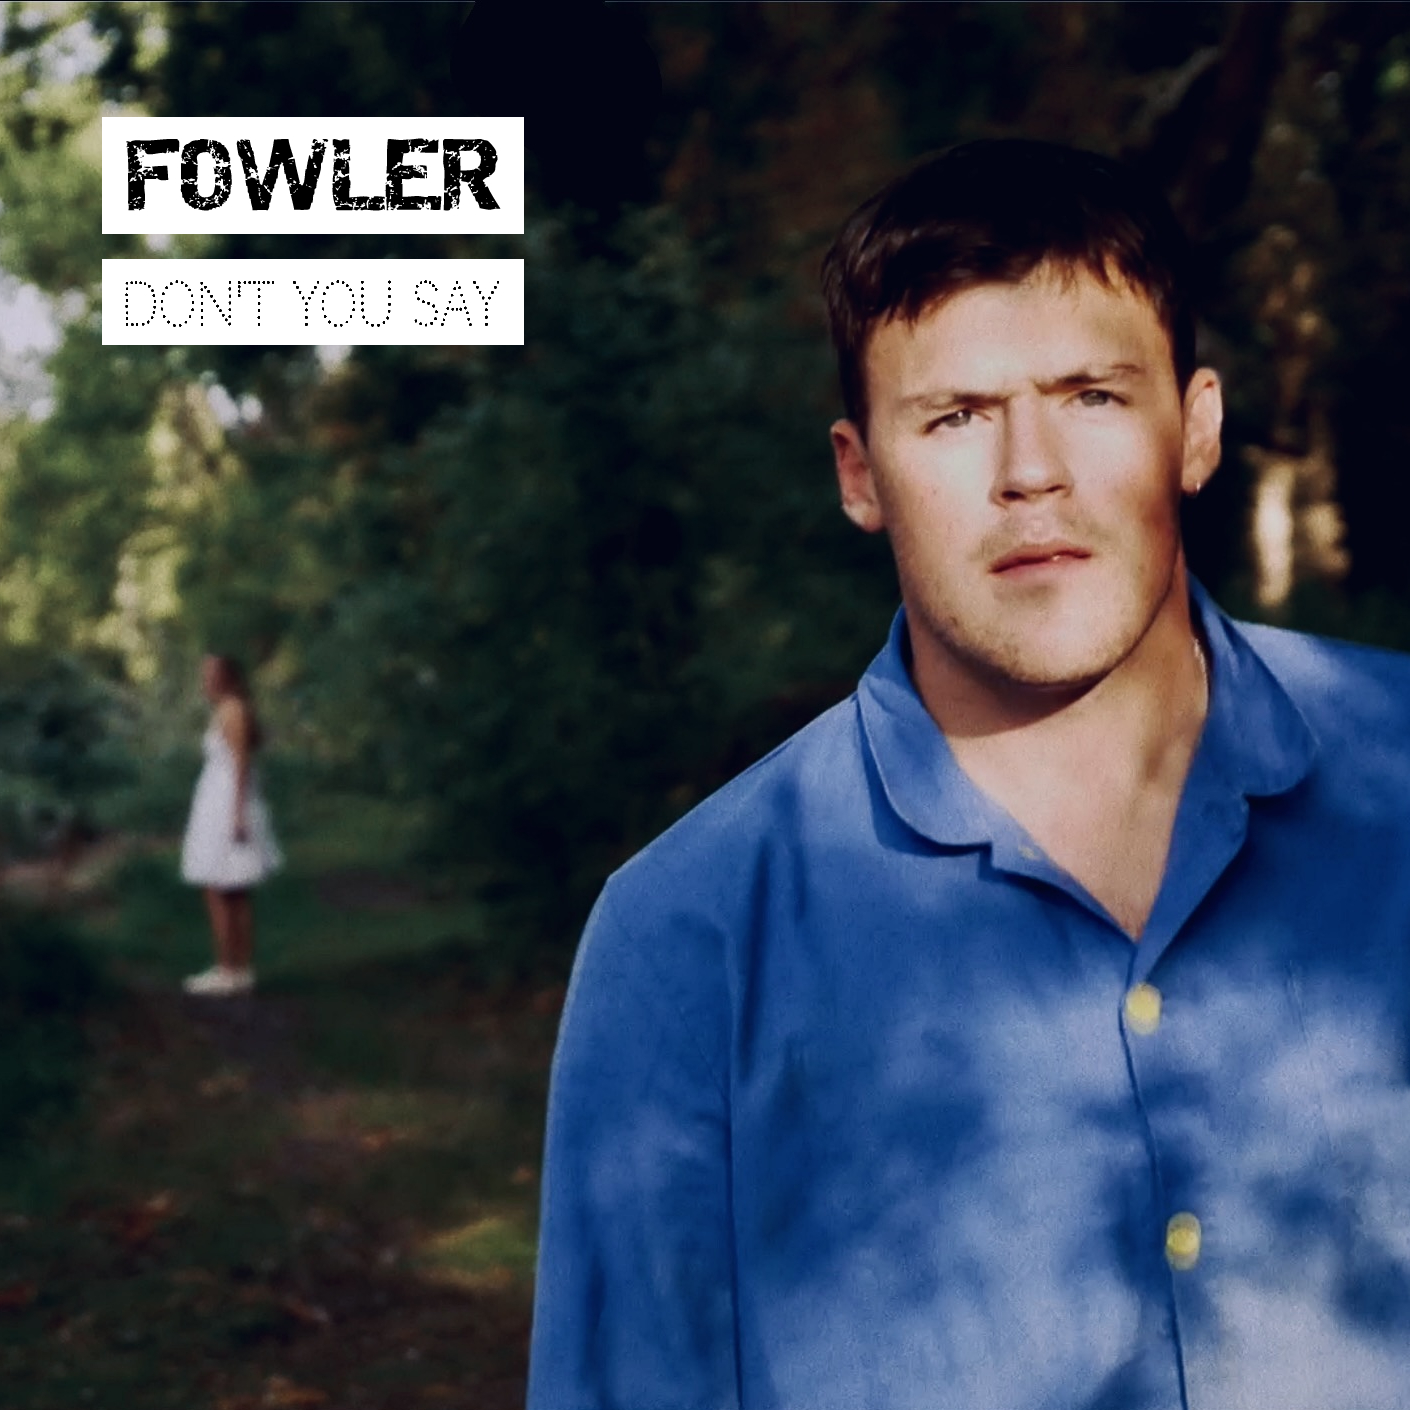 British Singer-Songwriter Fowler Releases New Single ‘Don’t You Say’ After Making Music Over Zoom Calls